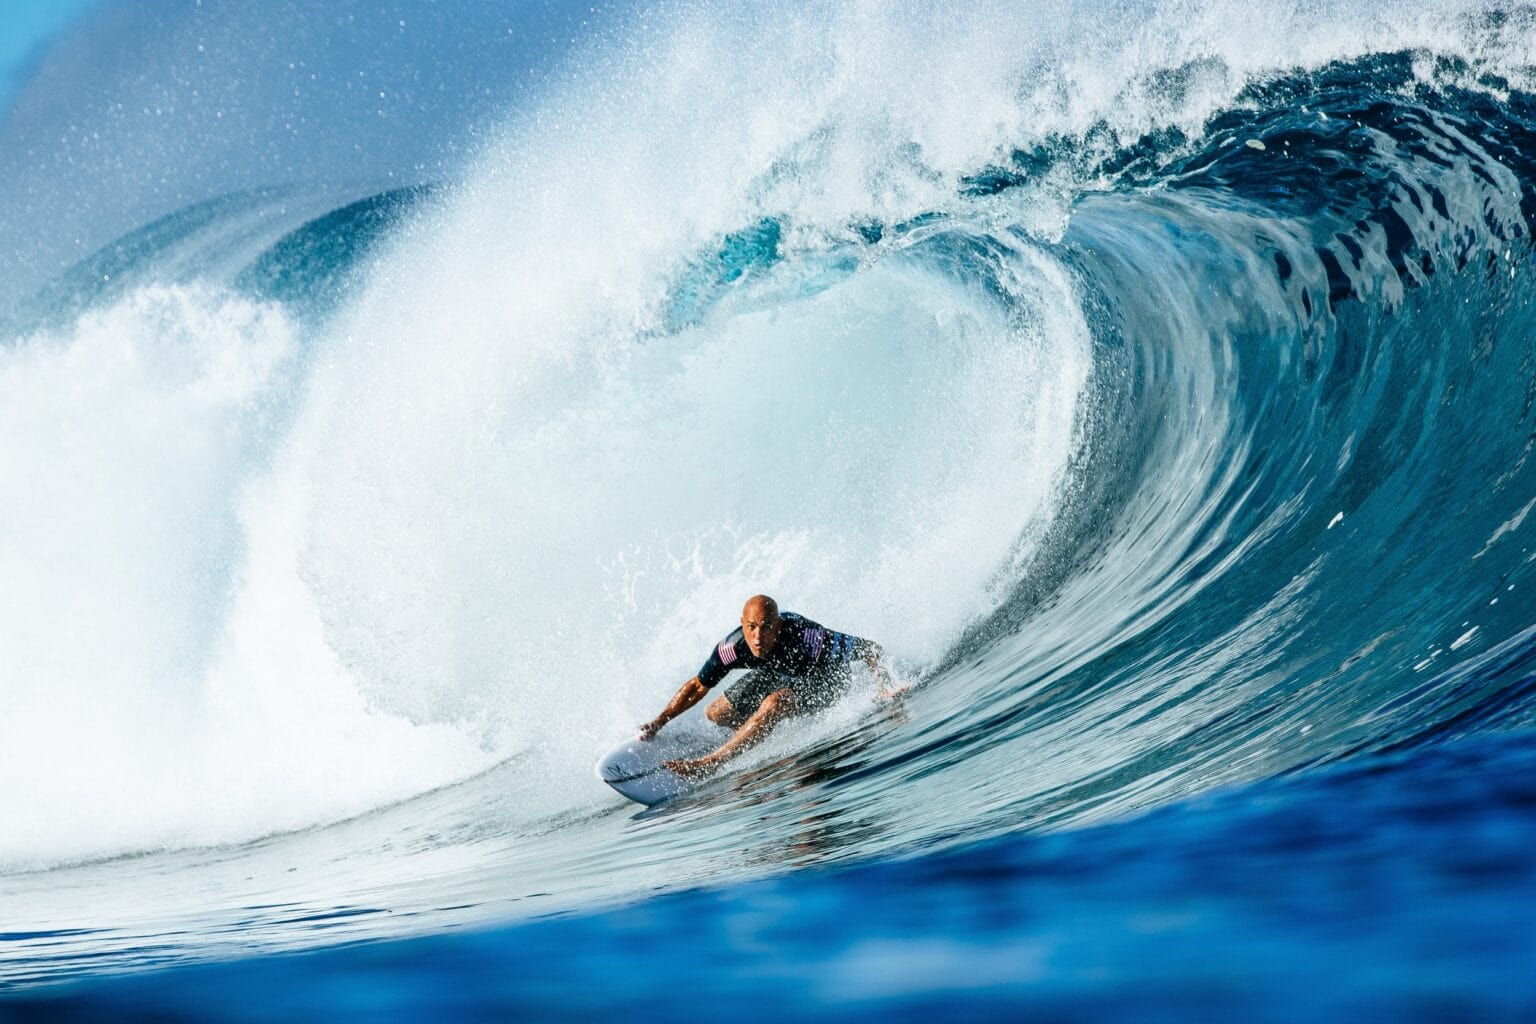 Surfer Kelly Slater catches a wave in 